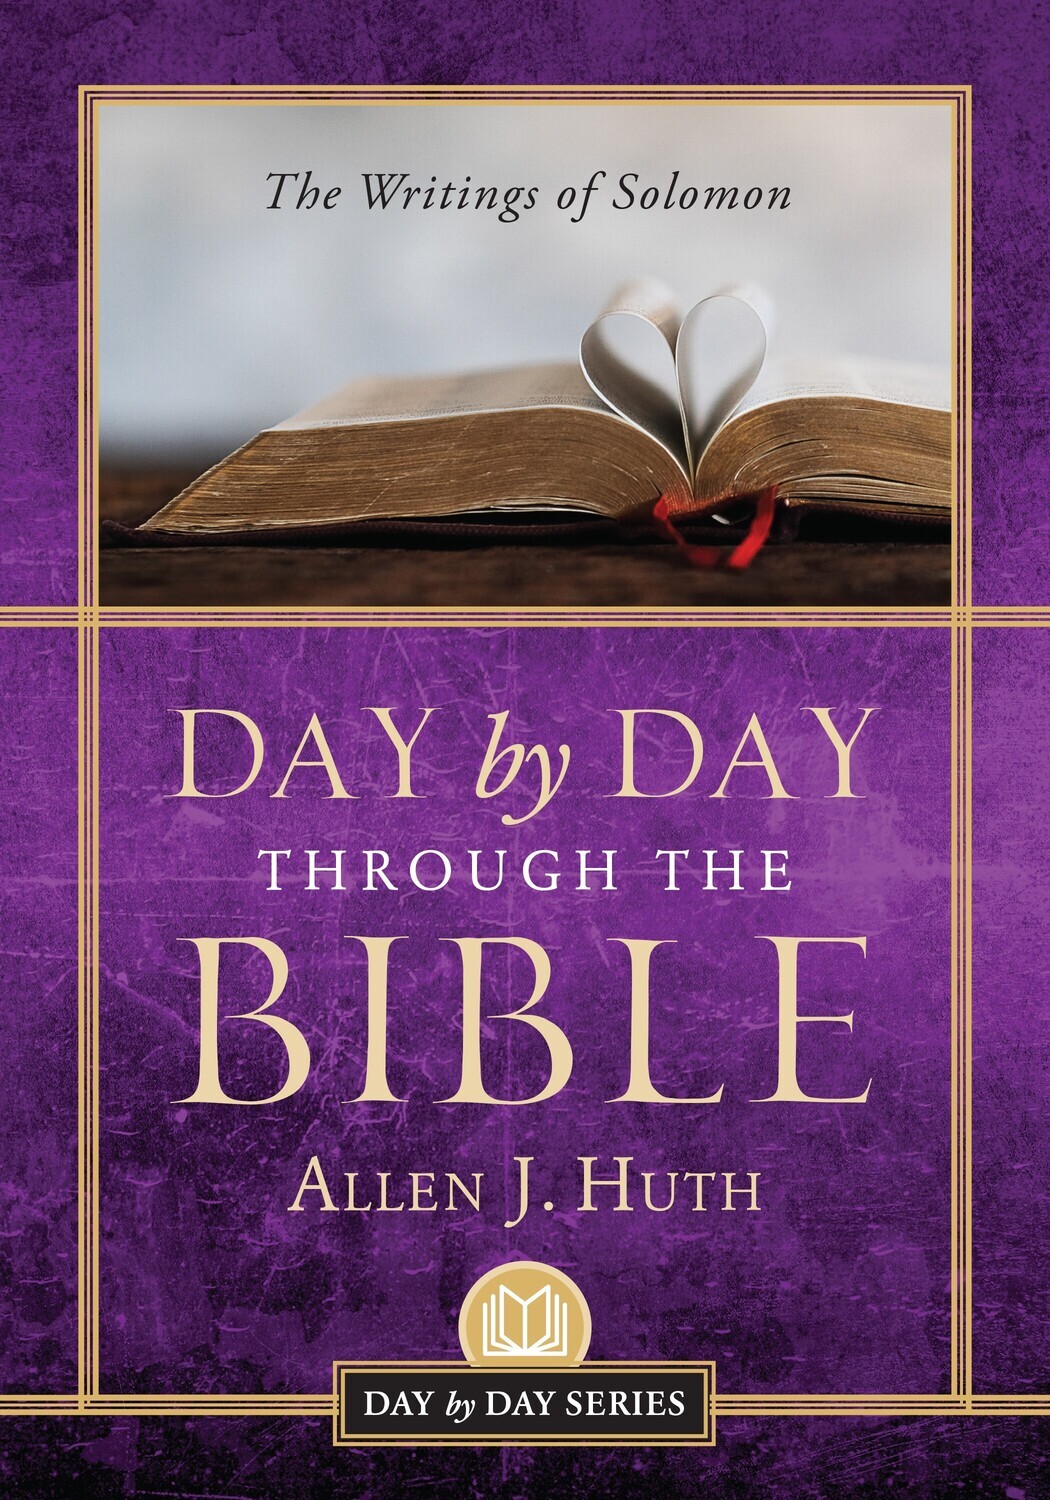 Day by Day Through the Bible: The Writings of Solomon